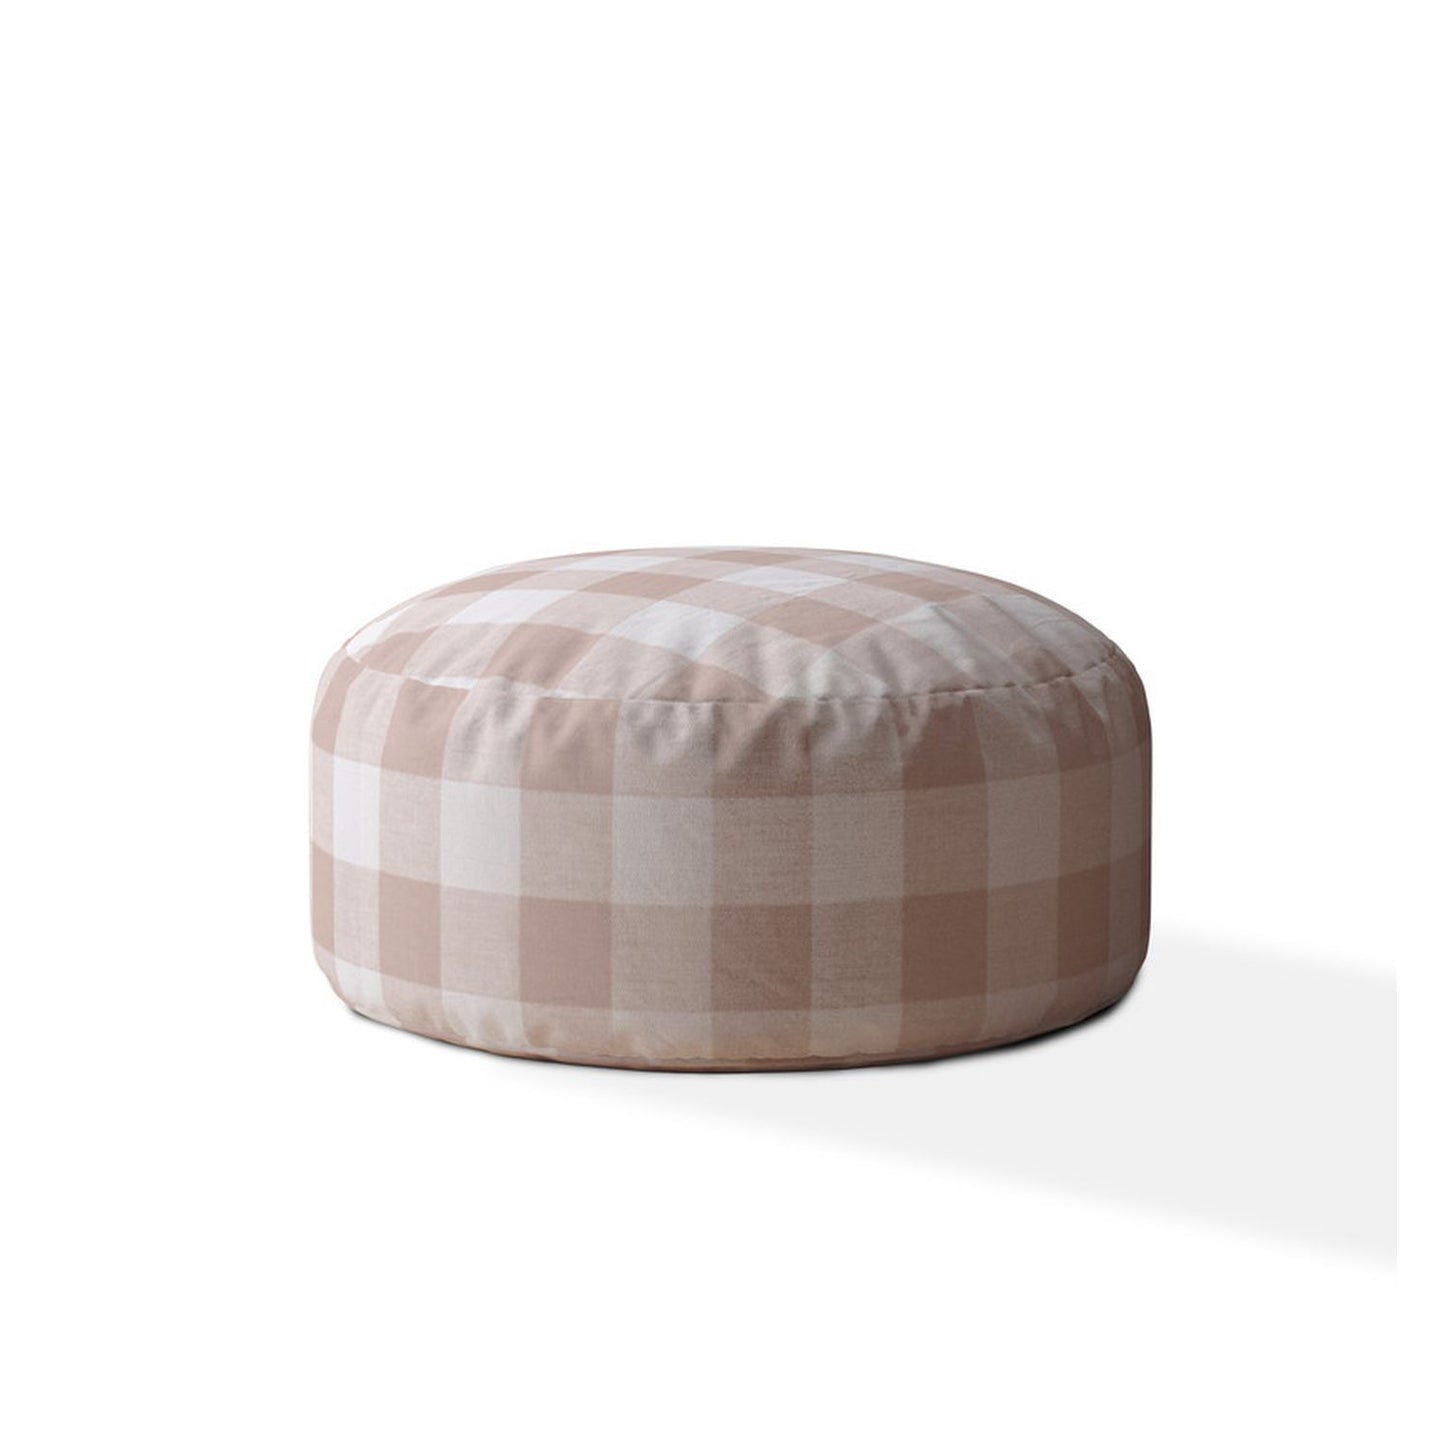 Indoor ANDY Blush Round Zipper Pouf - Cover Only - 24in dia x 20in tall